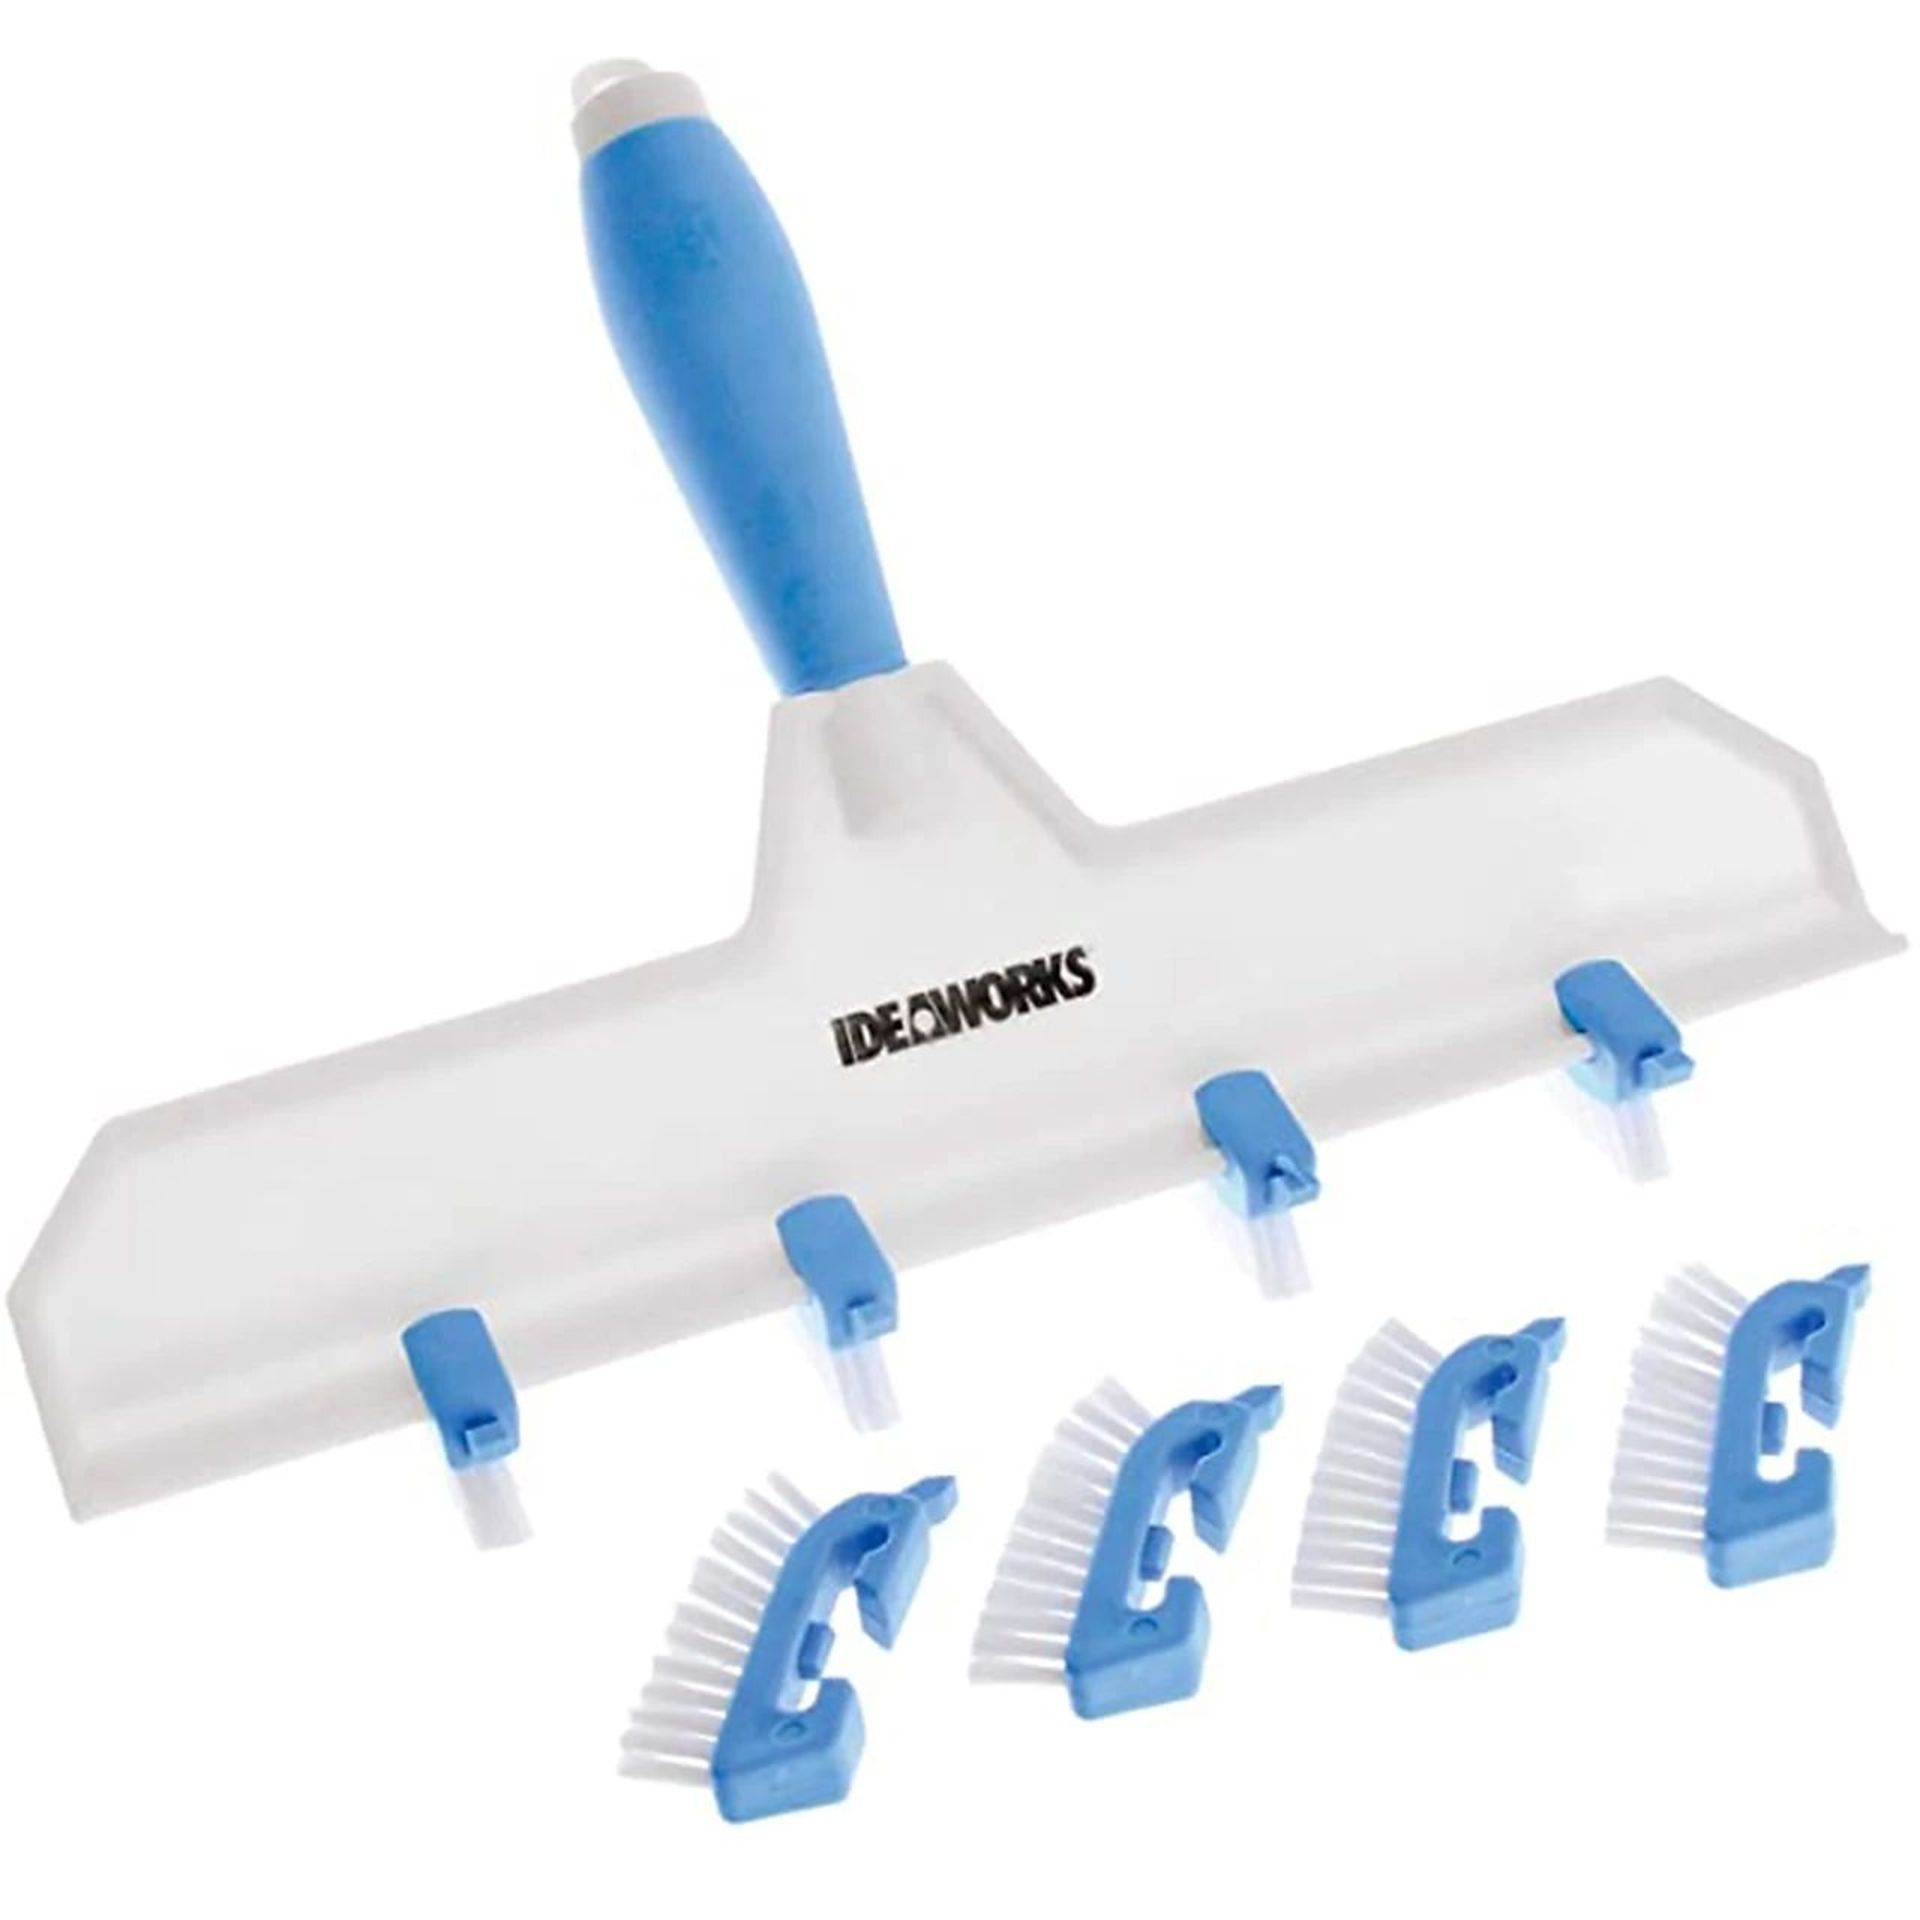 10 X BRAND NEW ADJUSTABLE HANDHELD GROUT CLEANING TOOLWITH SOFT GRIP HANDLE AND 8 MINI BRUSH HEADS - Bild 3 aus 3